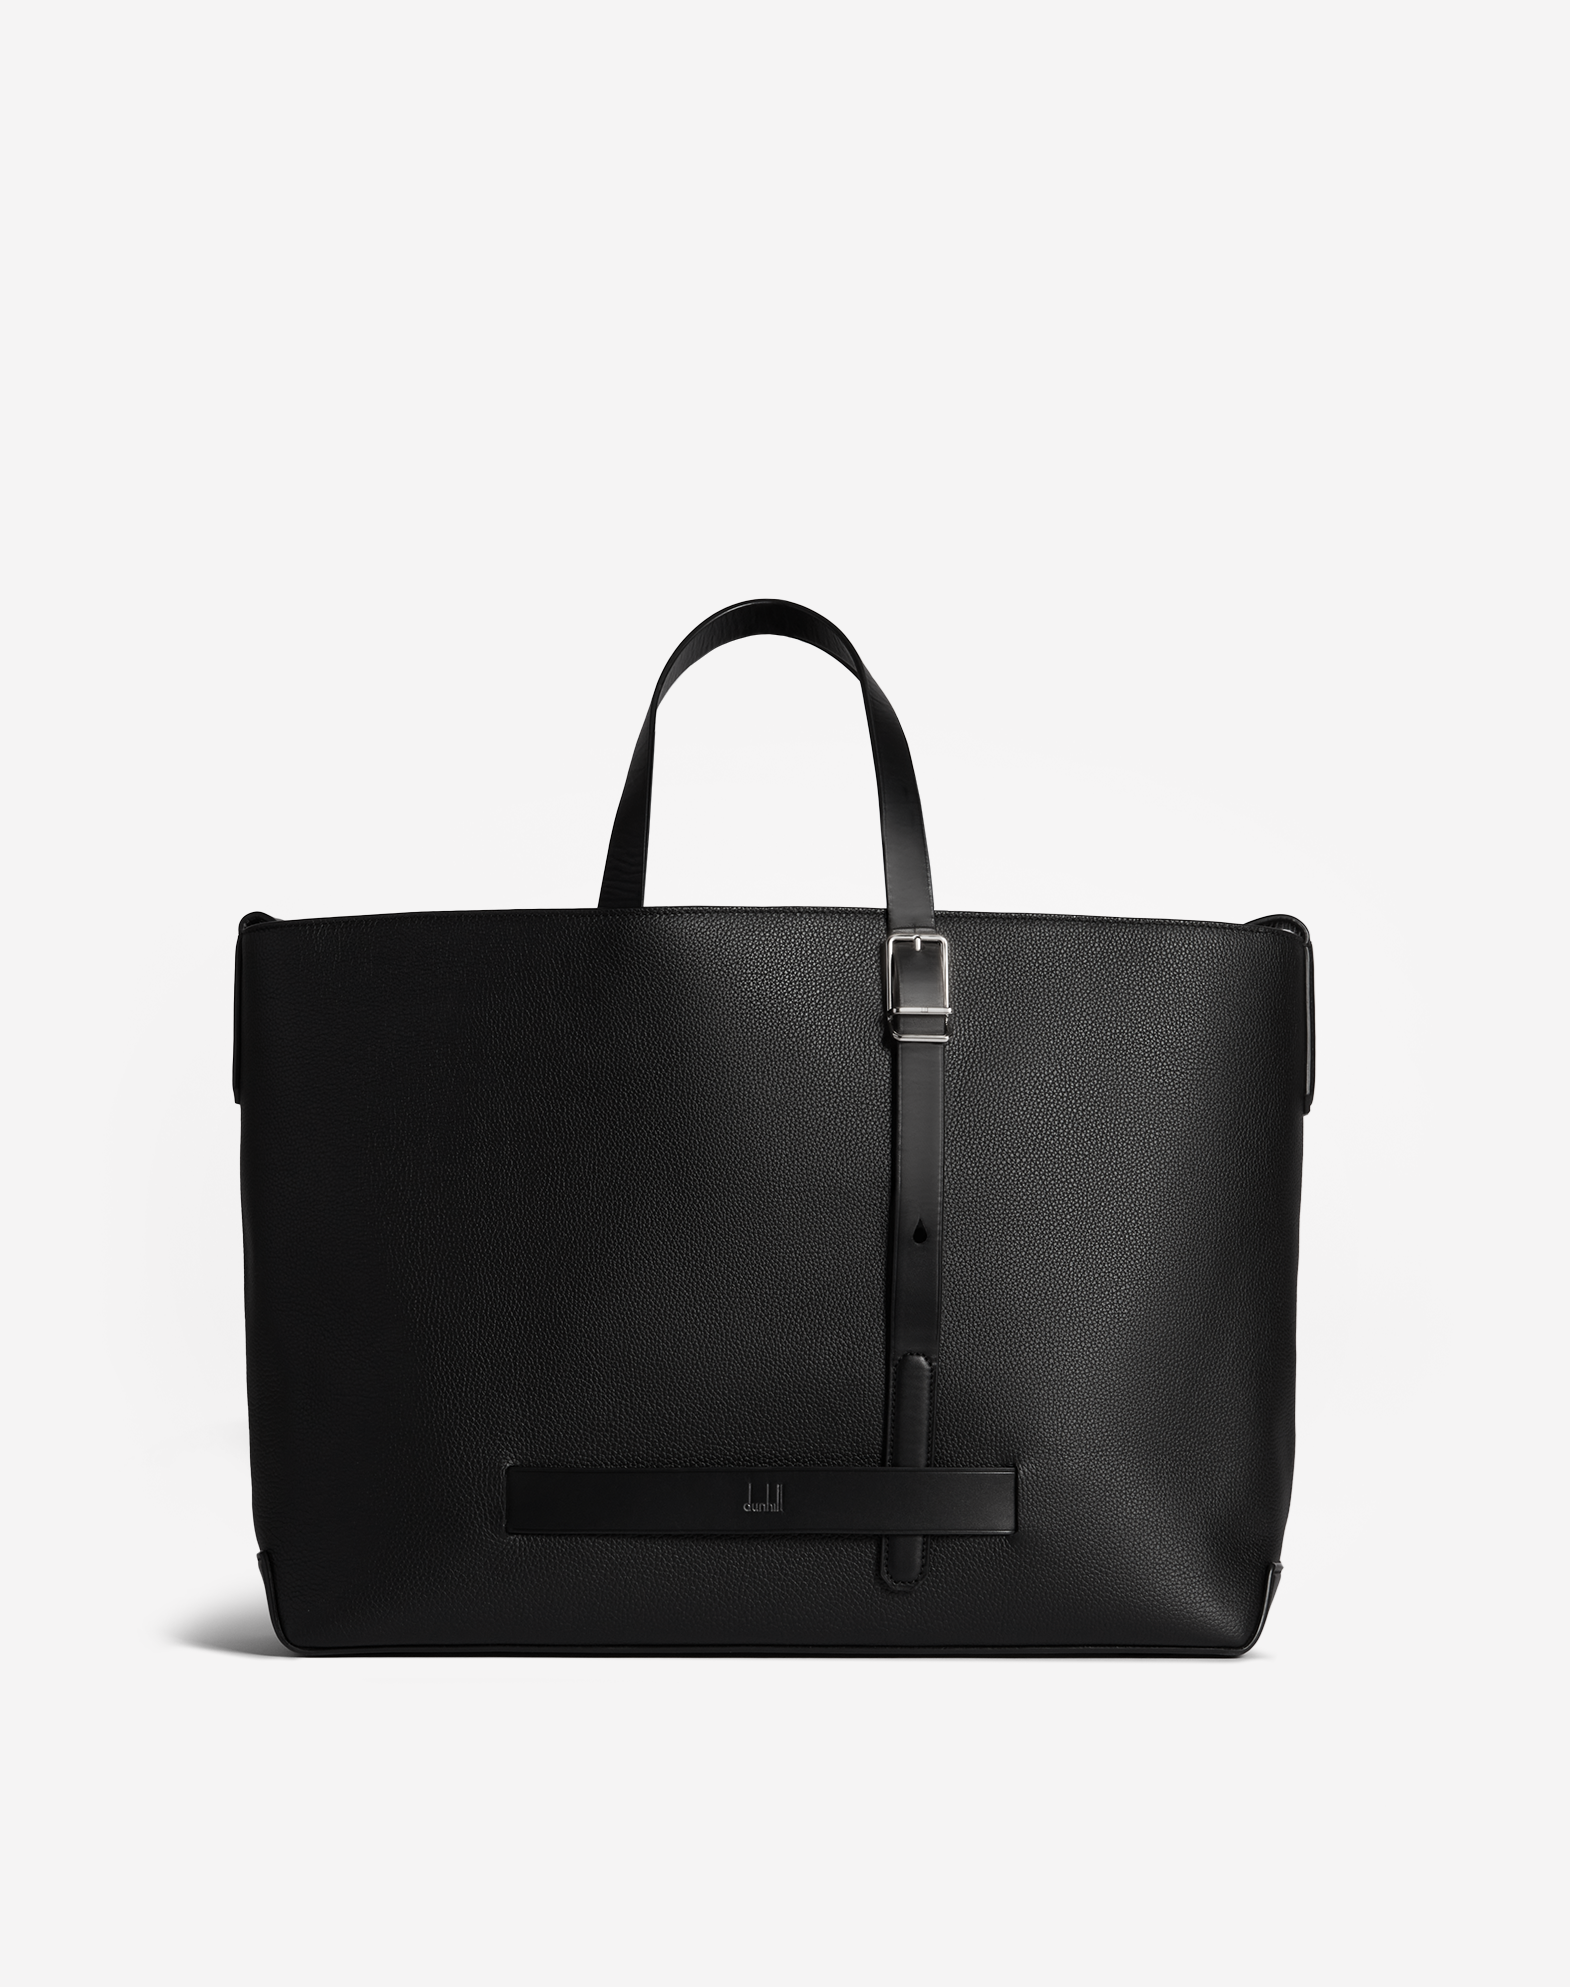 Dunhill Luxury Men's Totes